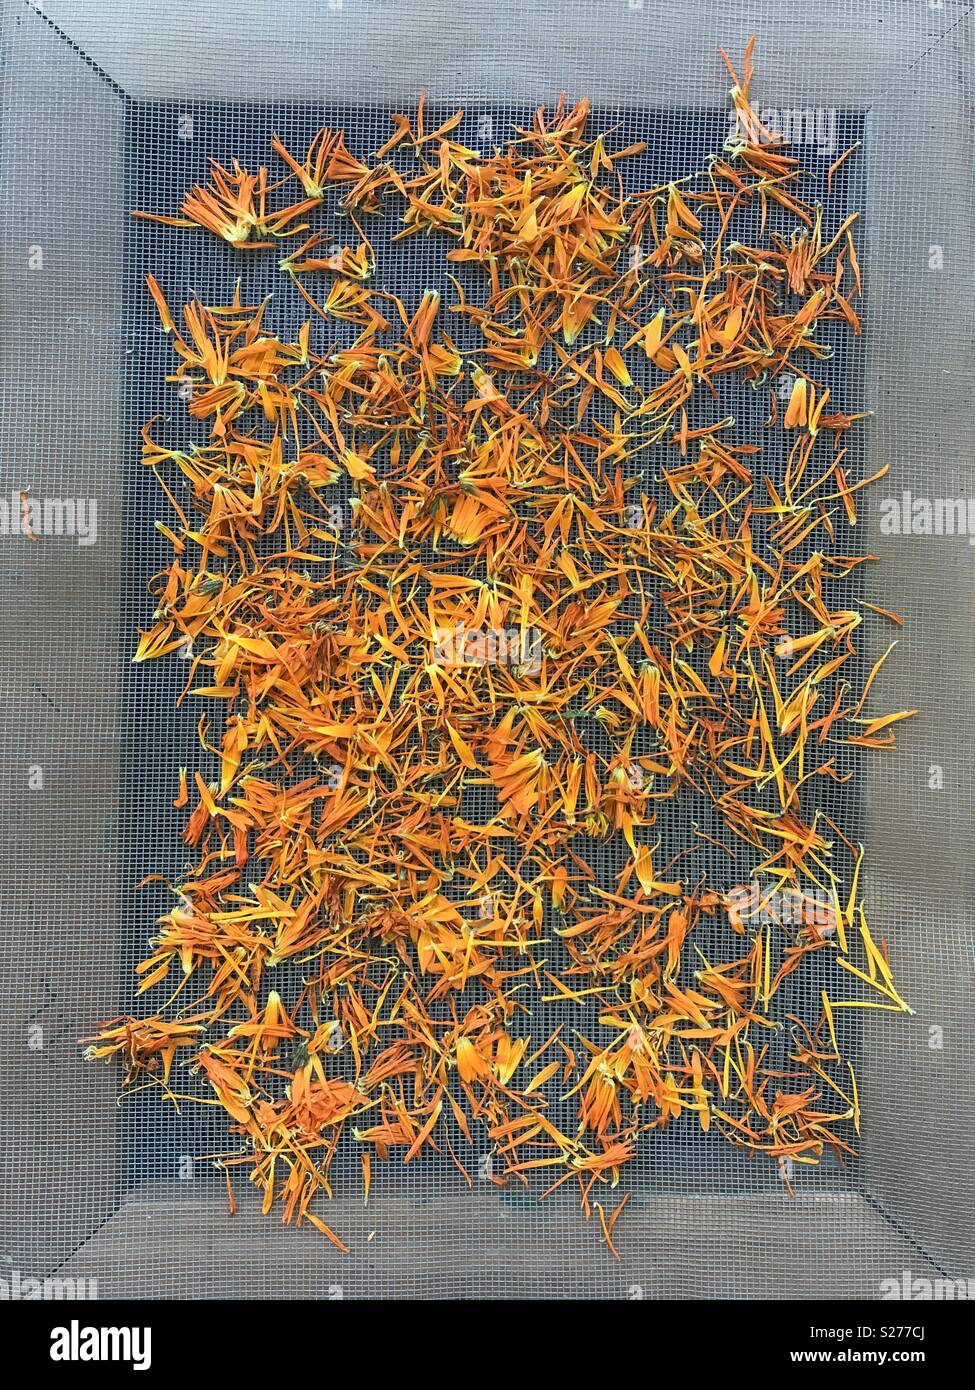 Drying flower petals of Calendula, used in soap-making, other medicinal uses Stock Photo